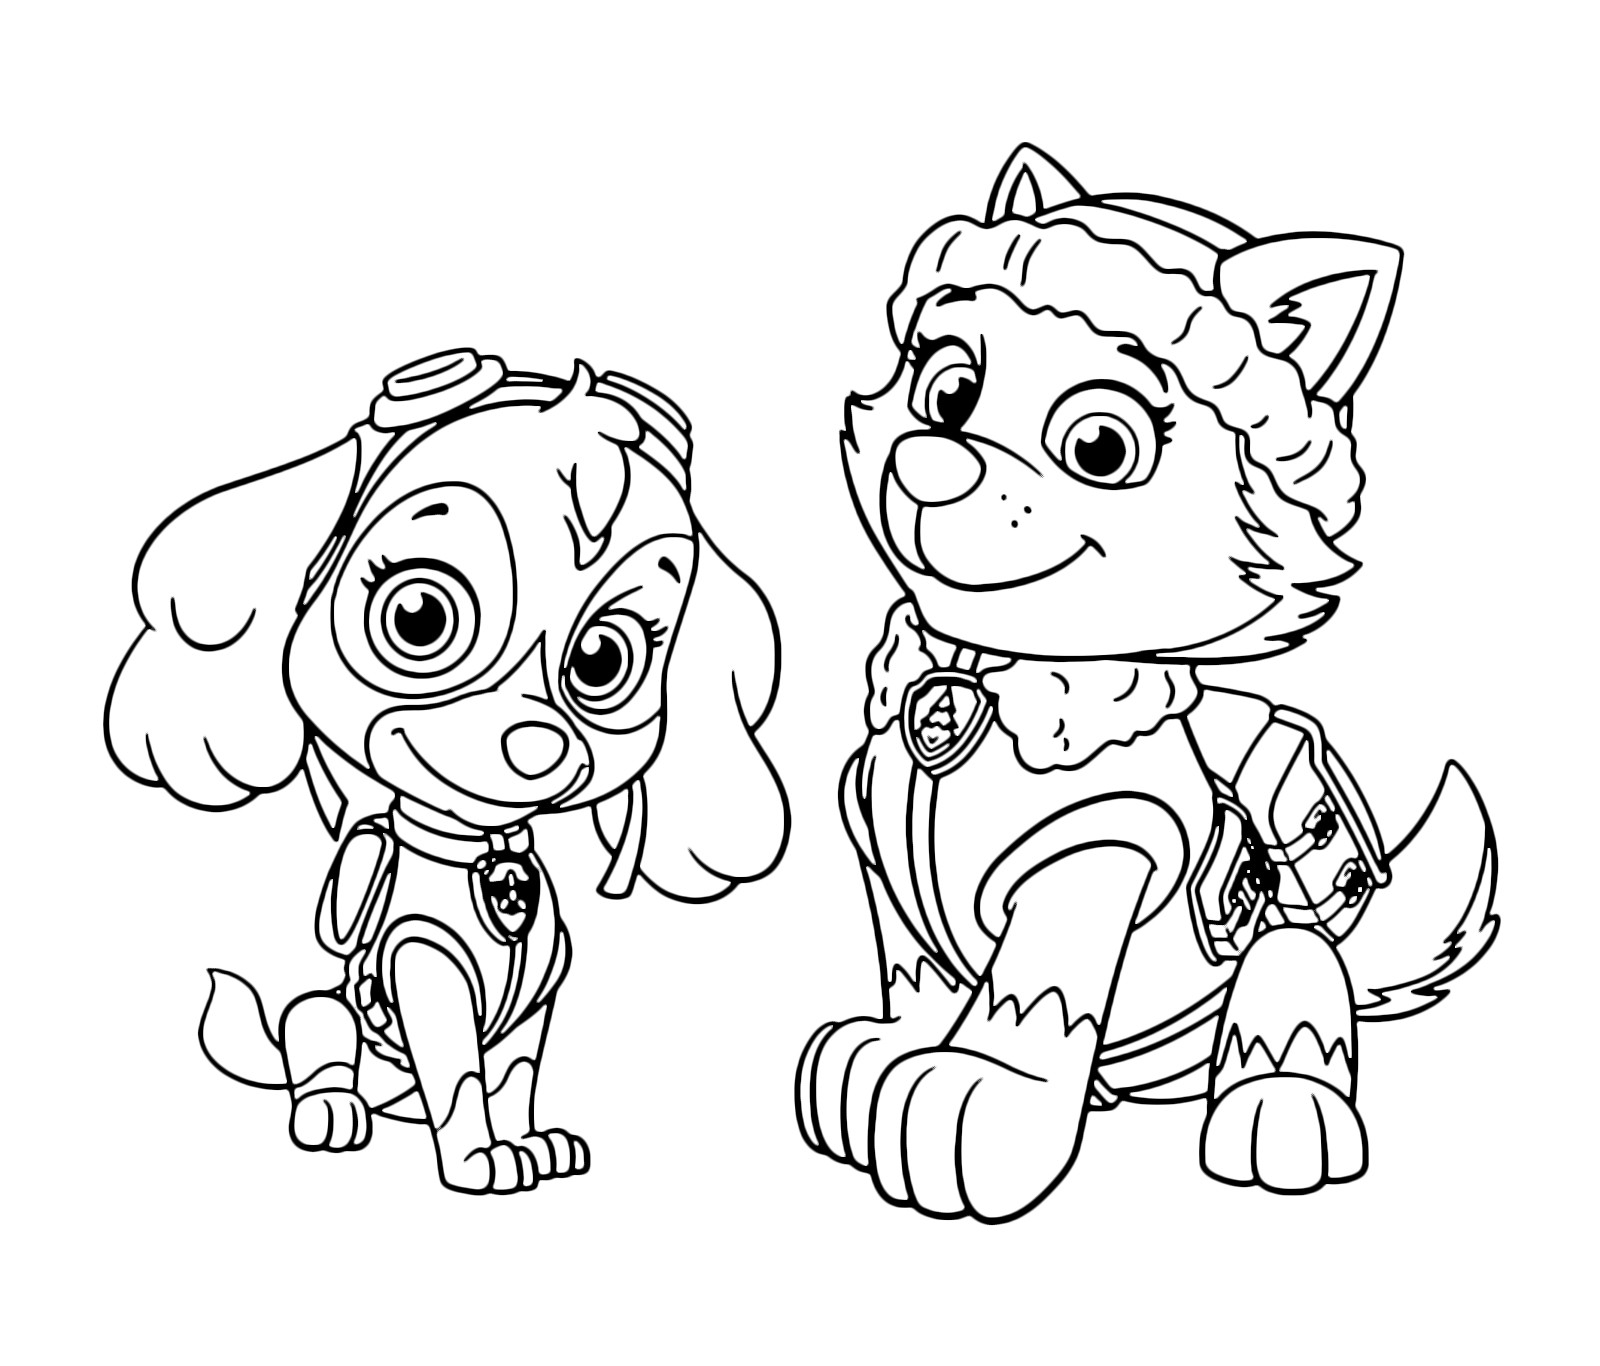 Paw Patrol Coloring Pages Everest
 Sky Everest Patrol Free Coloring Page • Animals Kids Paw